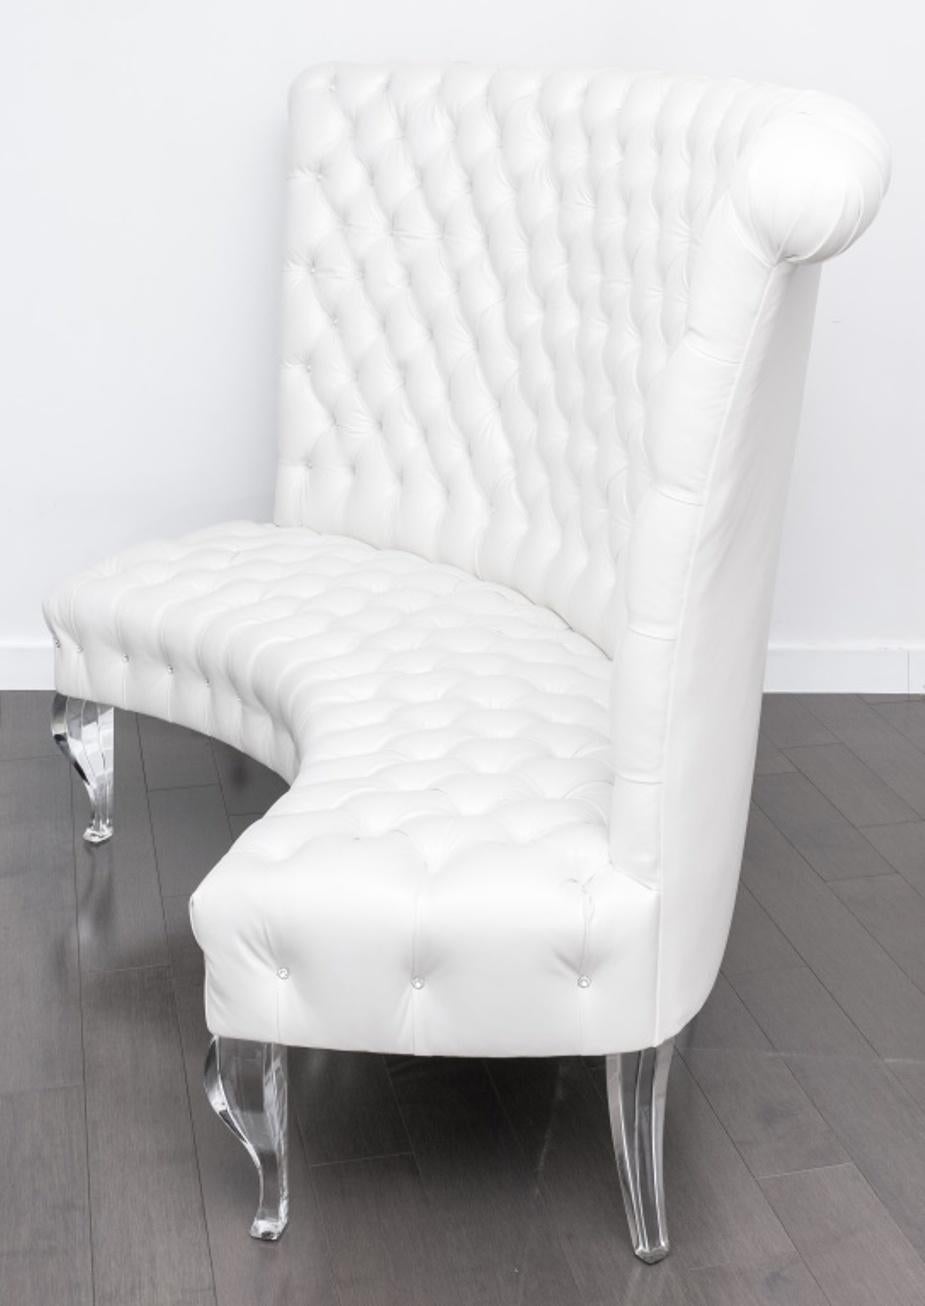 Hollywood Glam vegan white leather tufted curved banquette with scroll back and splayed tapering square lucite legs. In good condition. Wear consistent with age and use.

Dimensions: 51